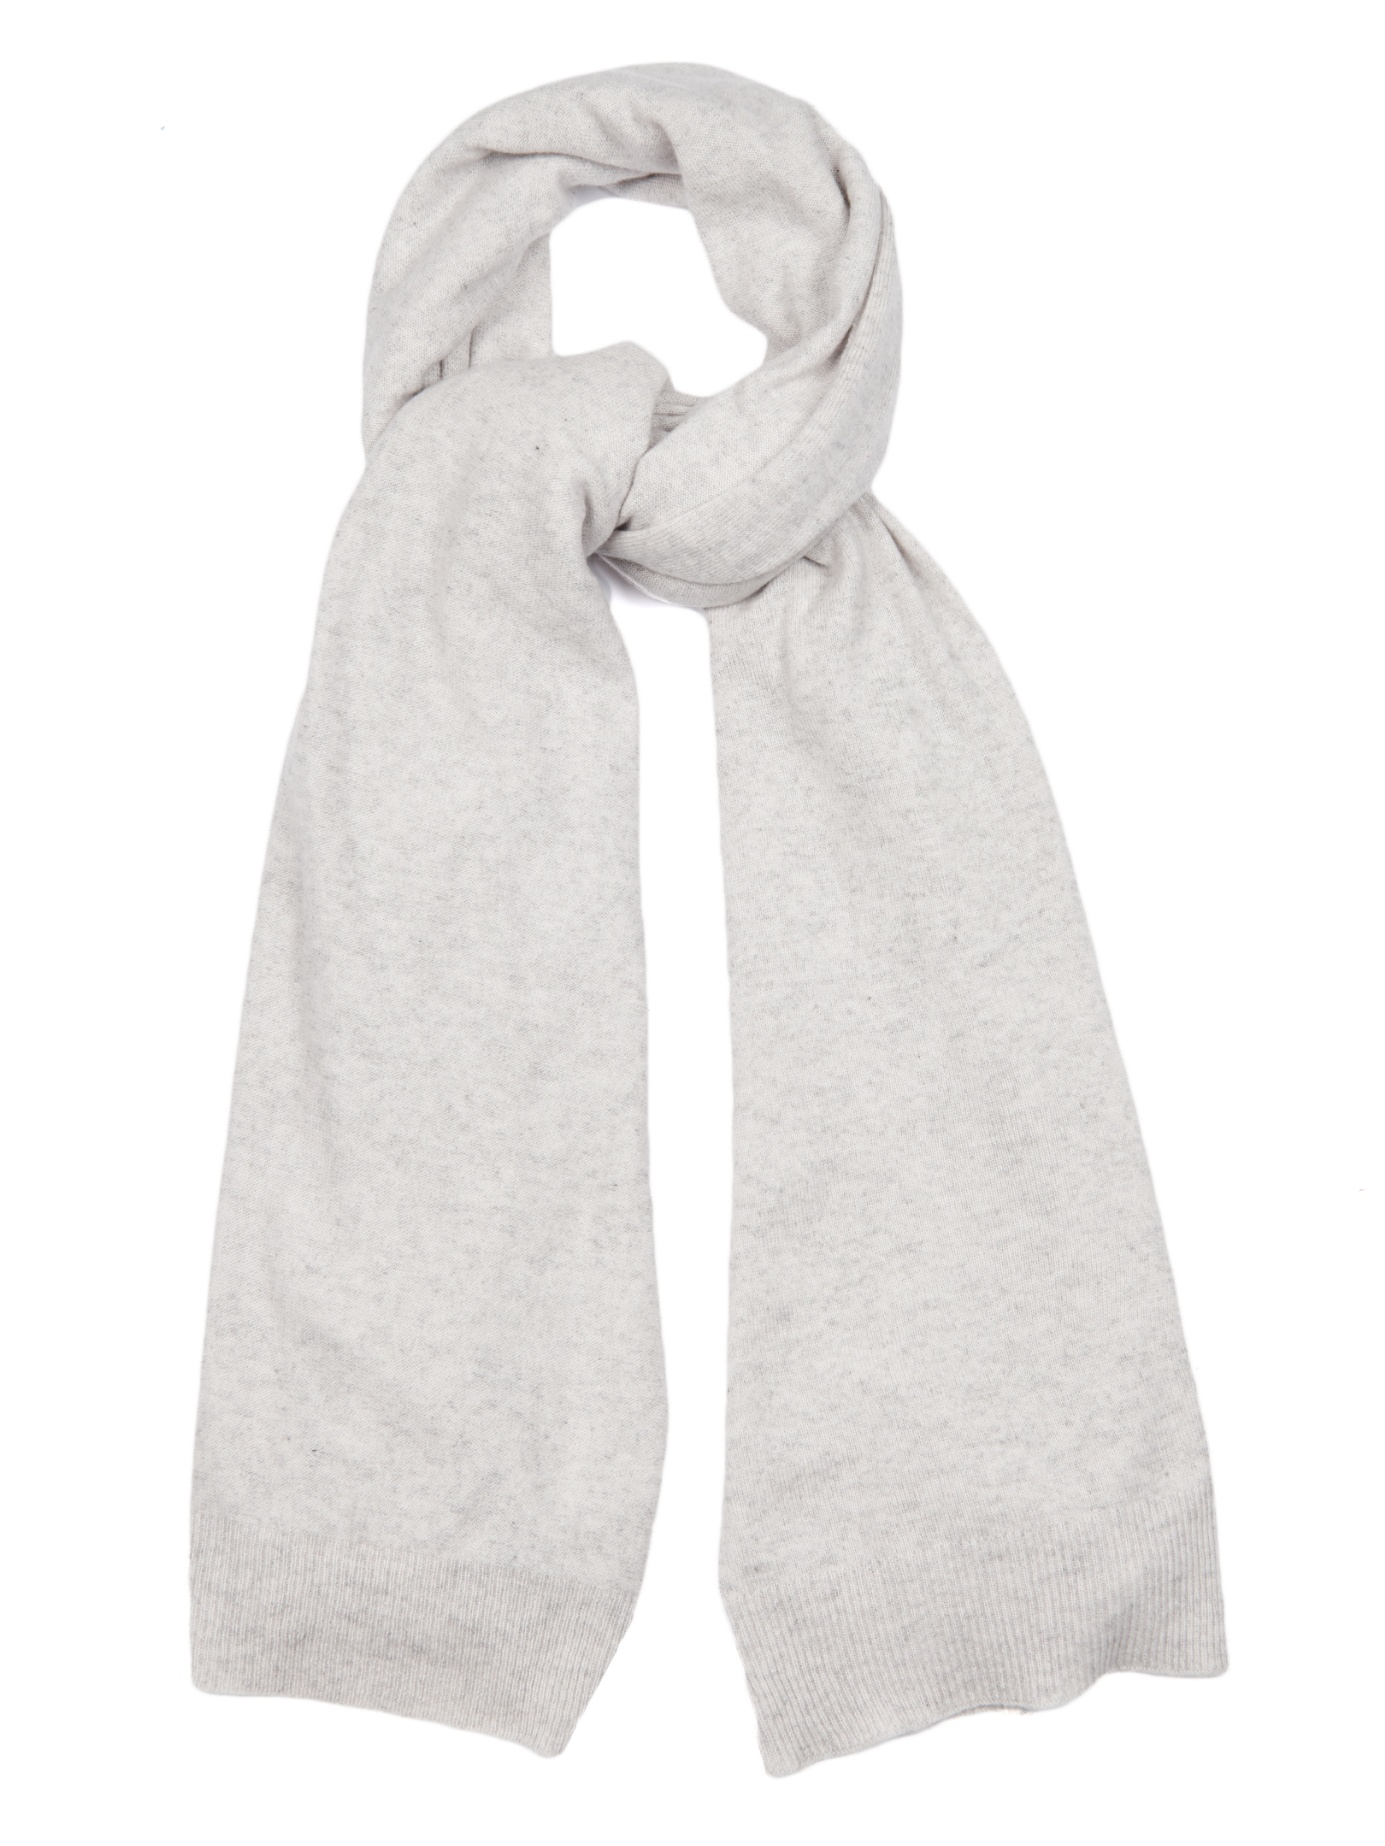 JOSEPH Cashmere Scarf in Ivory (White) - Lyst